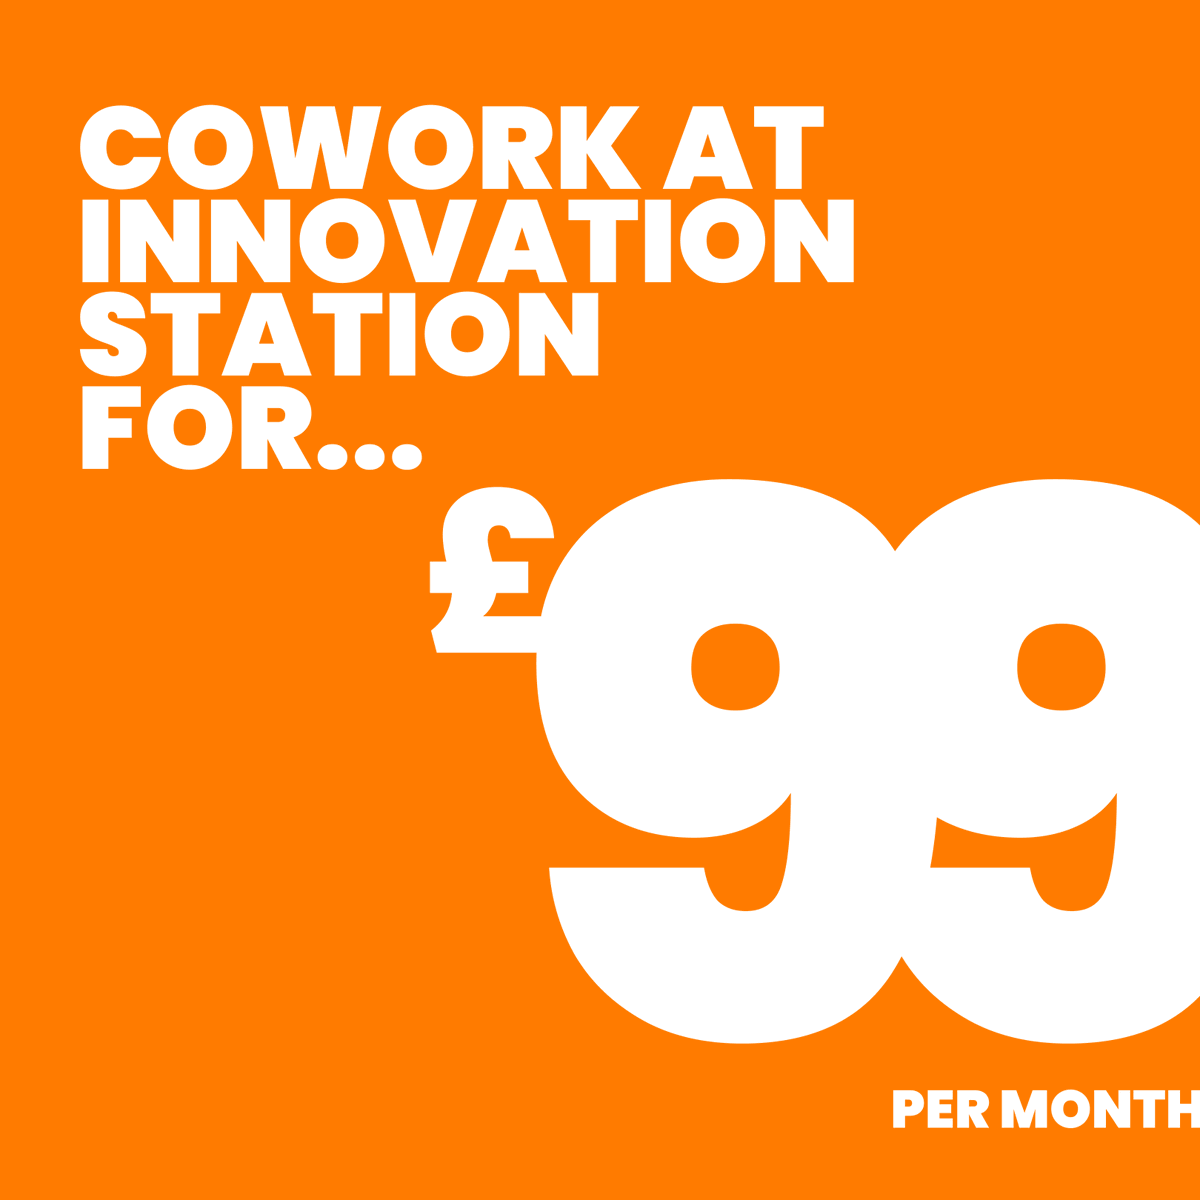 Exciting News Alert! 🤑 This month, we’re revamping our memberships offering more flexibility and perks 💻 Introducing NEW Full-time Coworking and two NEW Virtual Memberships! 🌟 Plus, don’t miss out on our Innovation Station Offer 👀 #coworking #southwales #startups